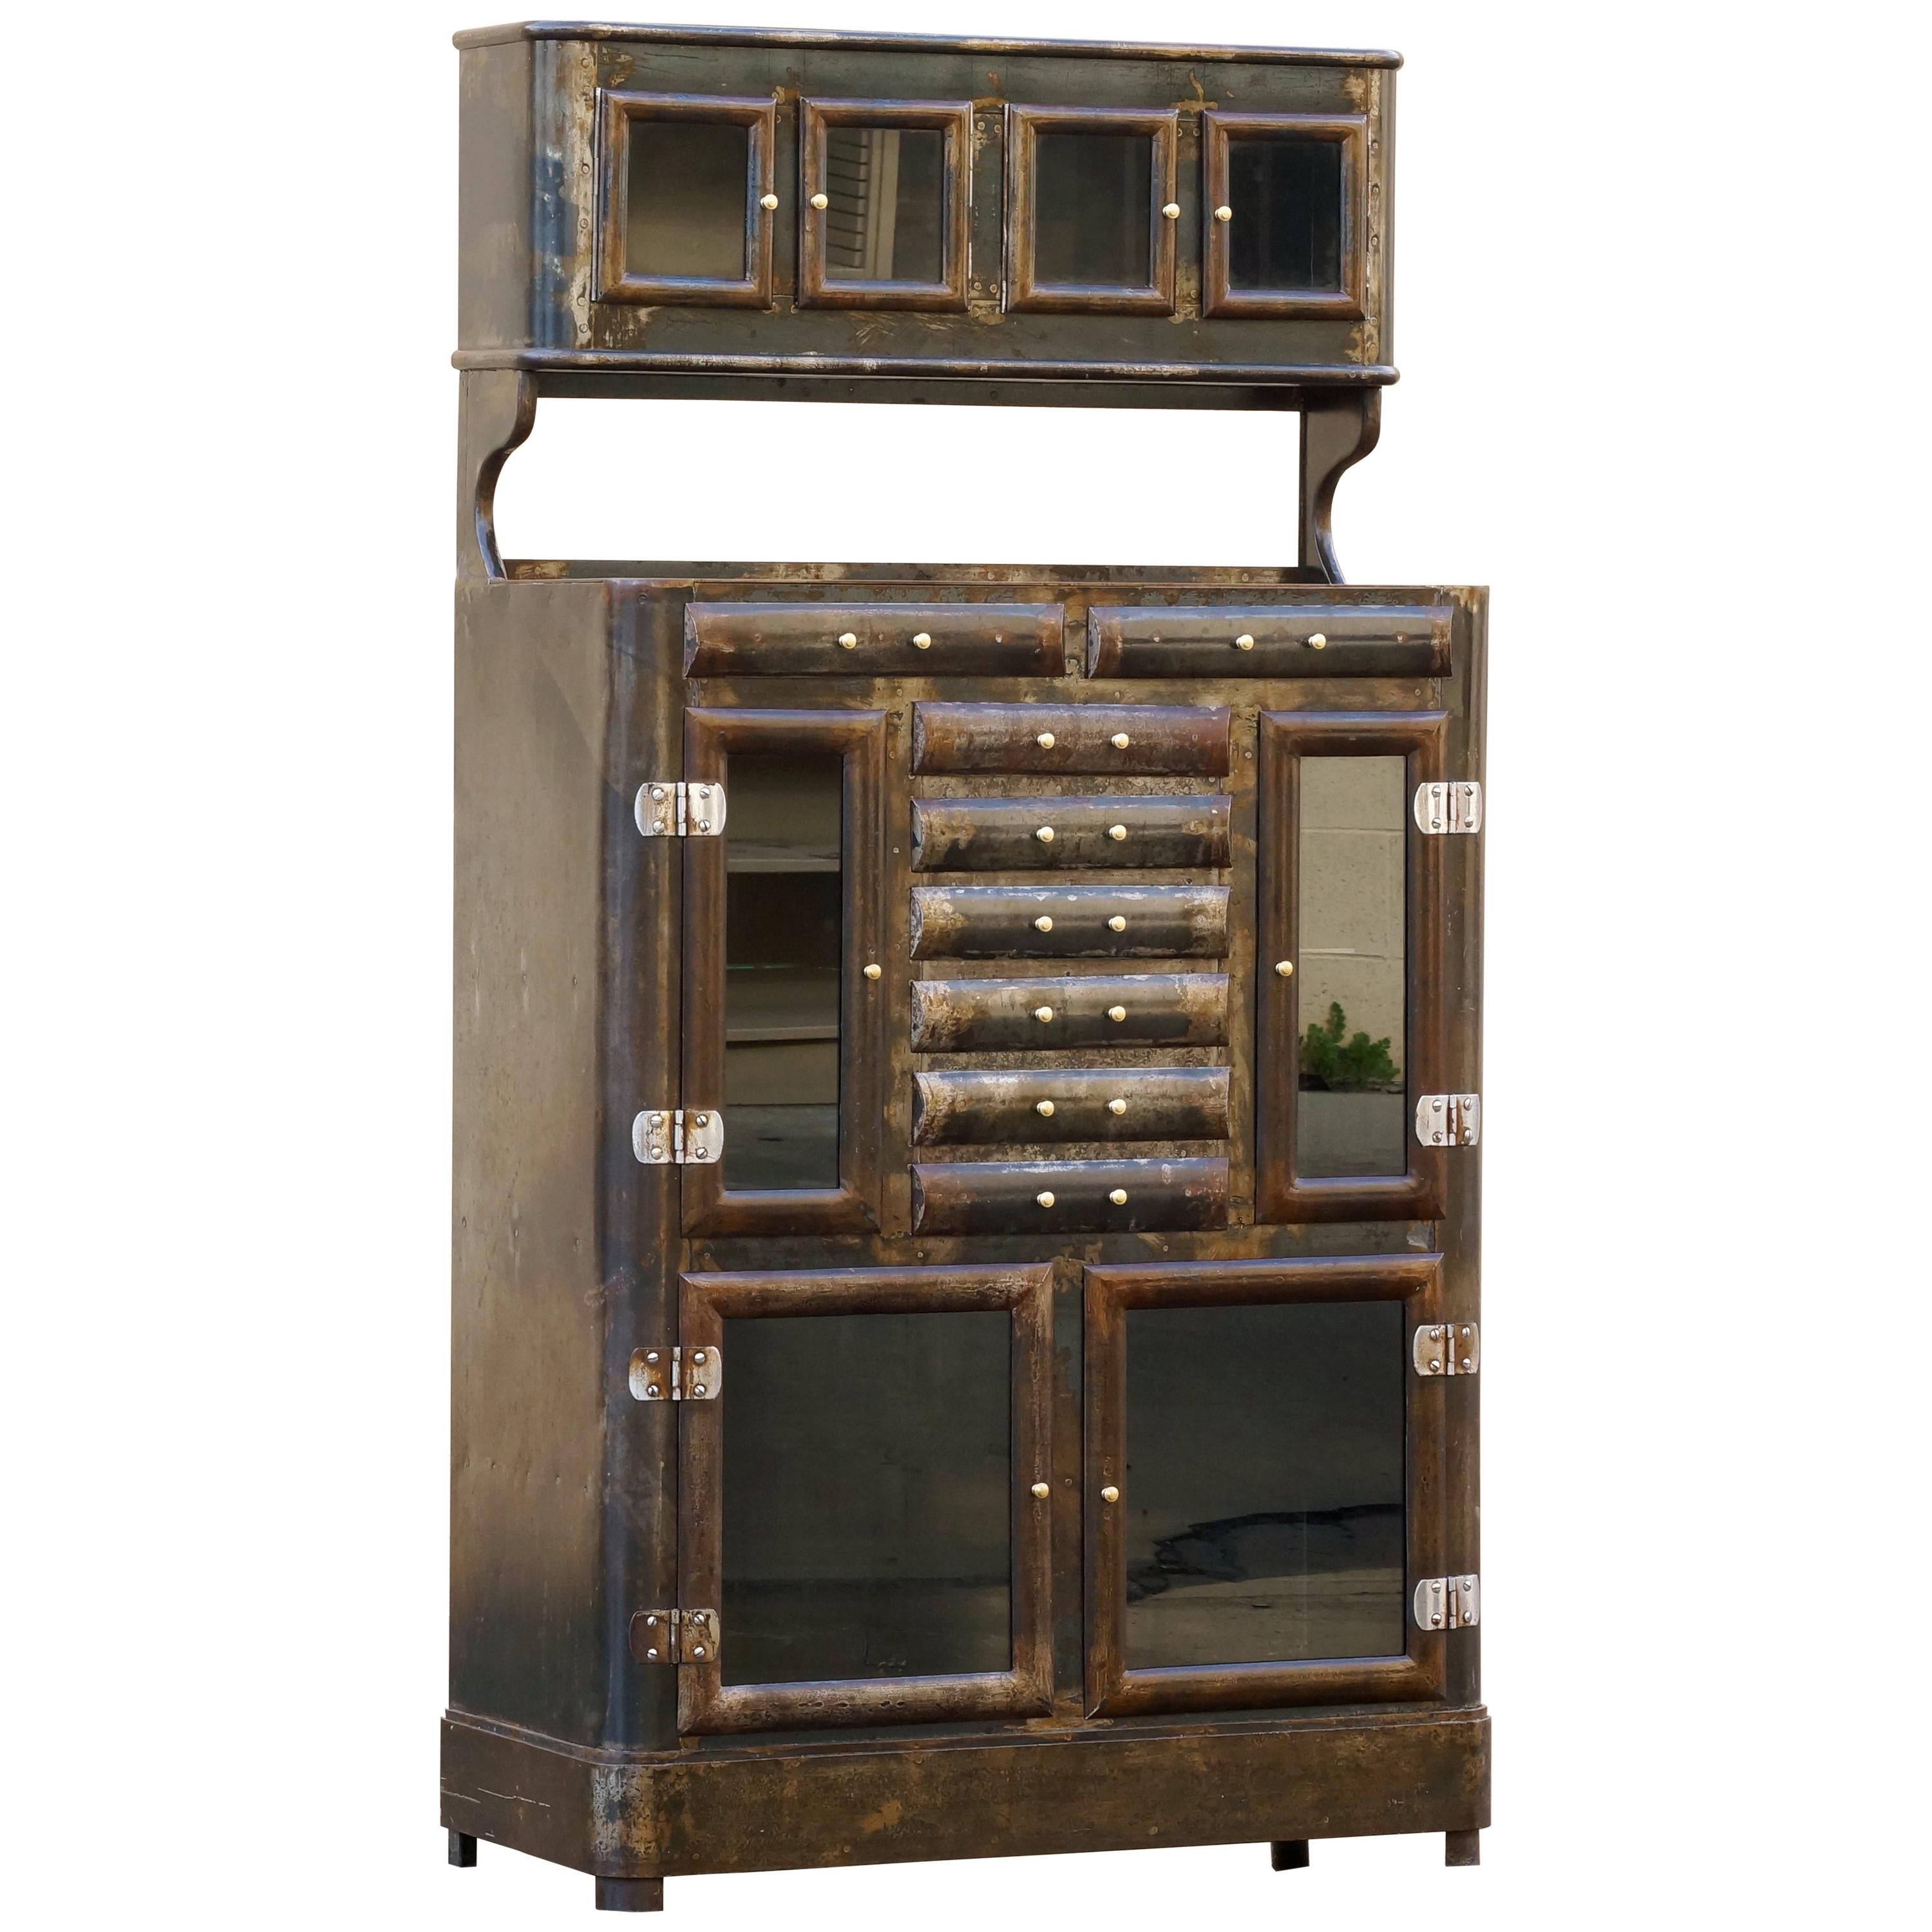 1920s Apothecary Cabinet with Distressed Patina